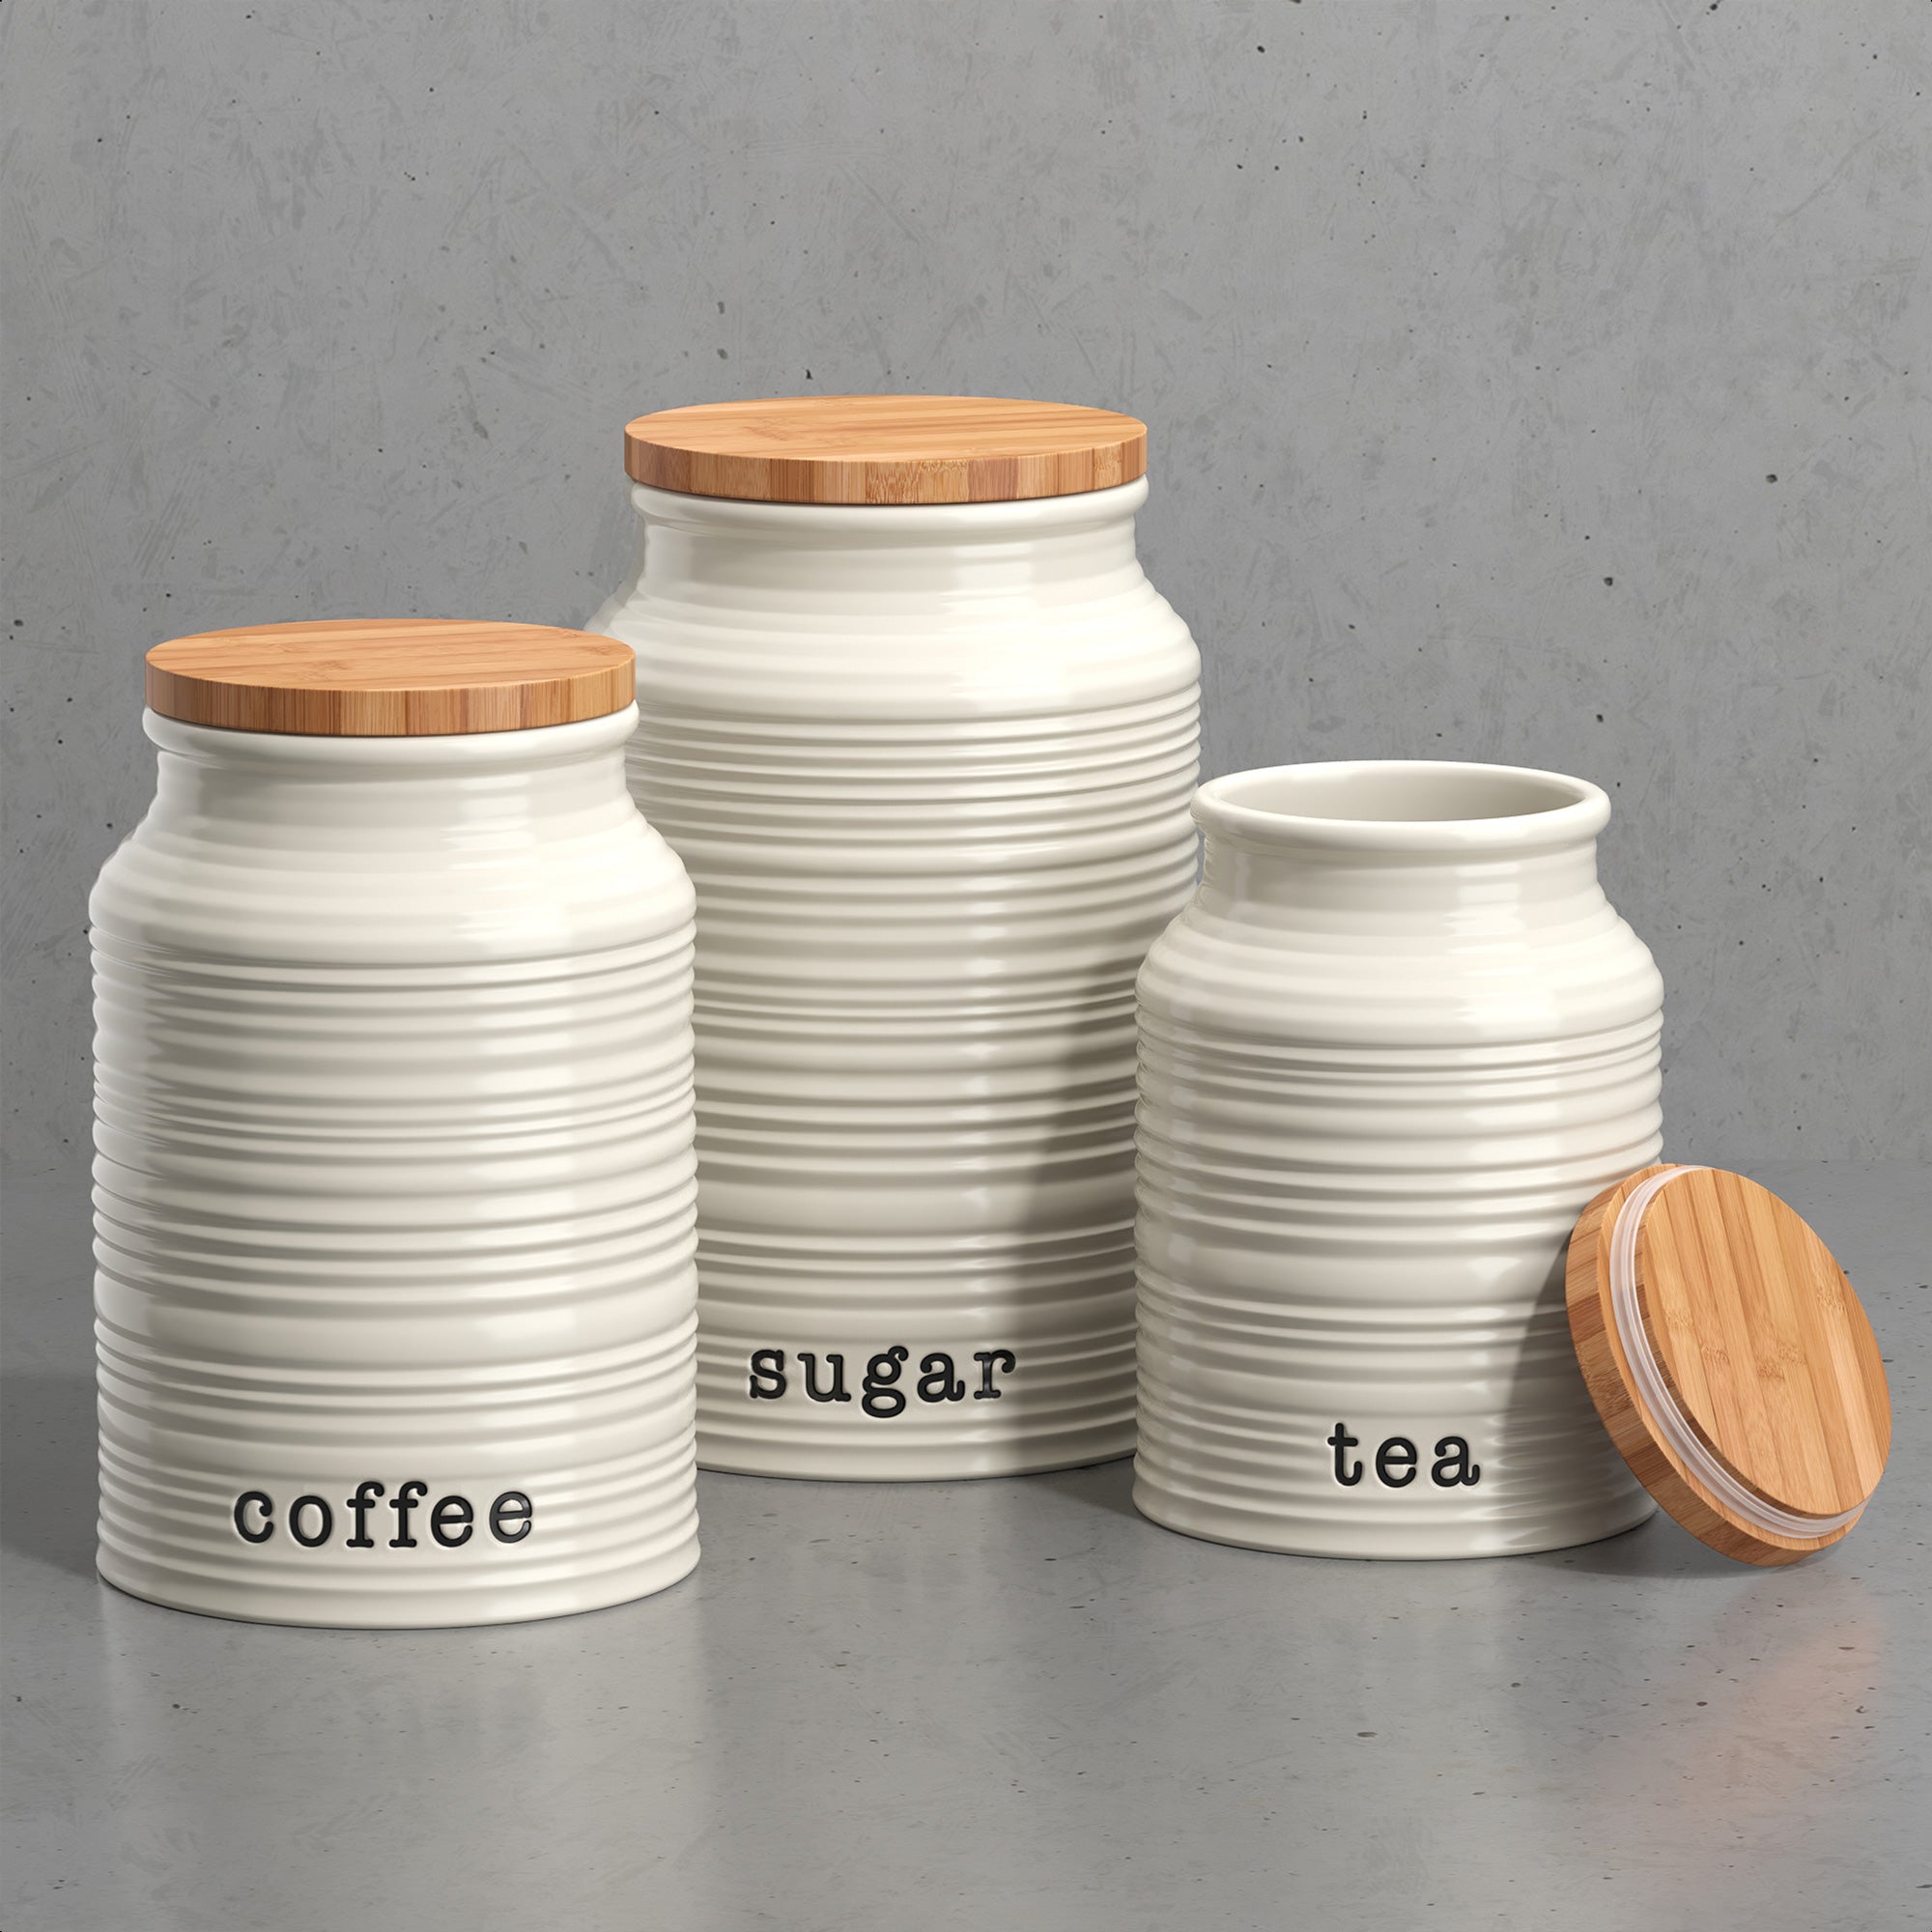 Barnyard Designs Canister Sets for Kitchen Counter, Ceramic